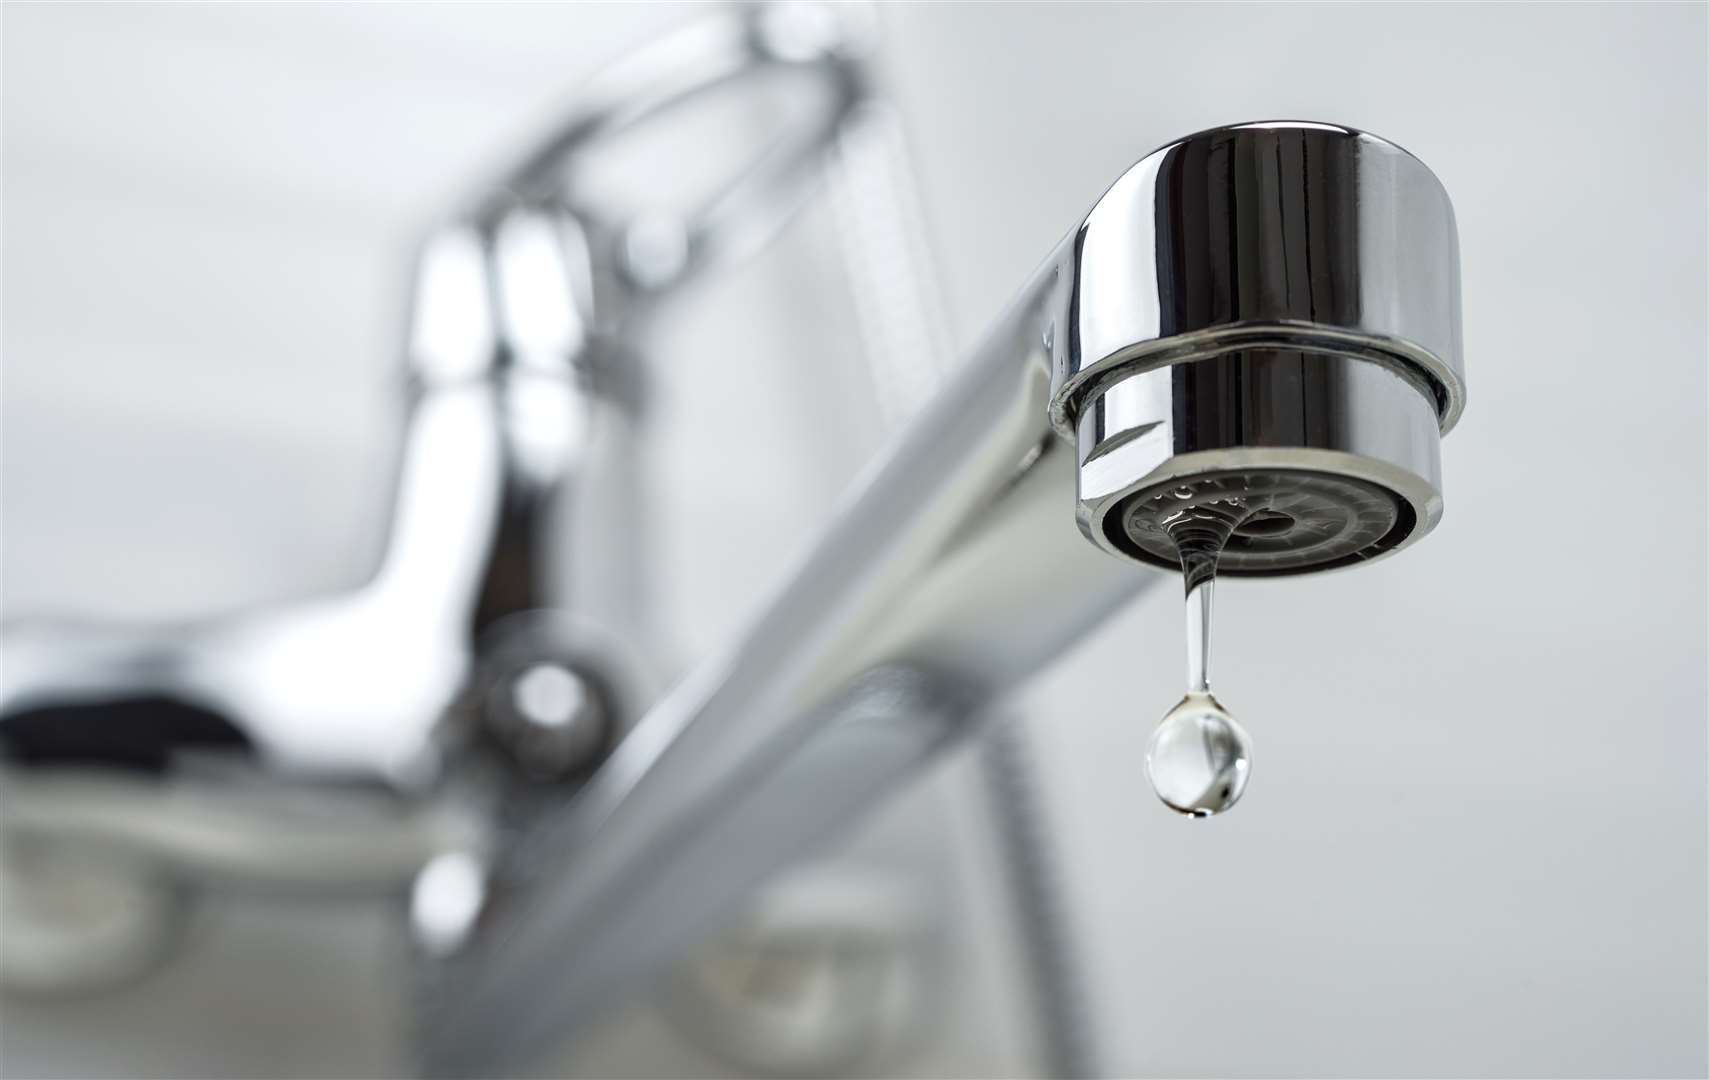 Scottish Water said the issue was affecting some customers in the Rhiconich area.